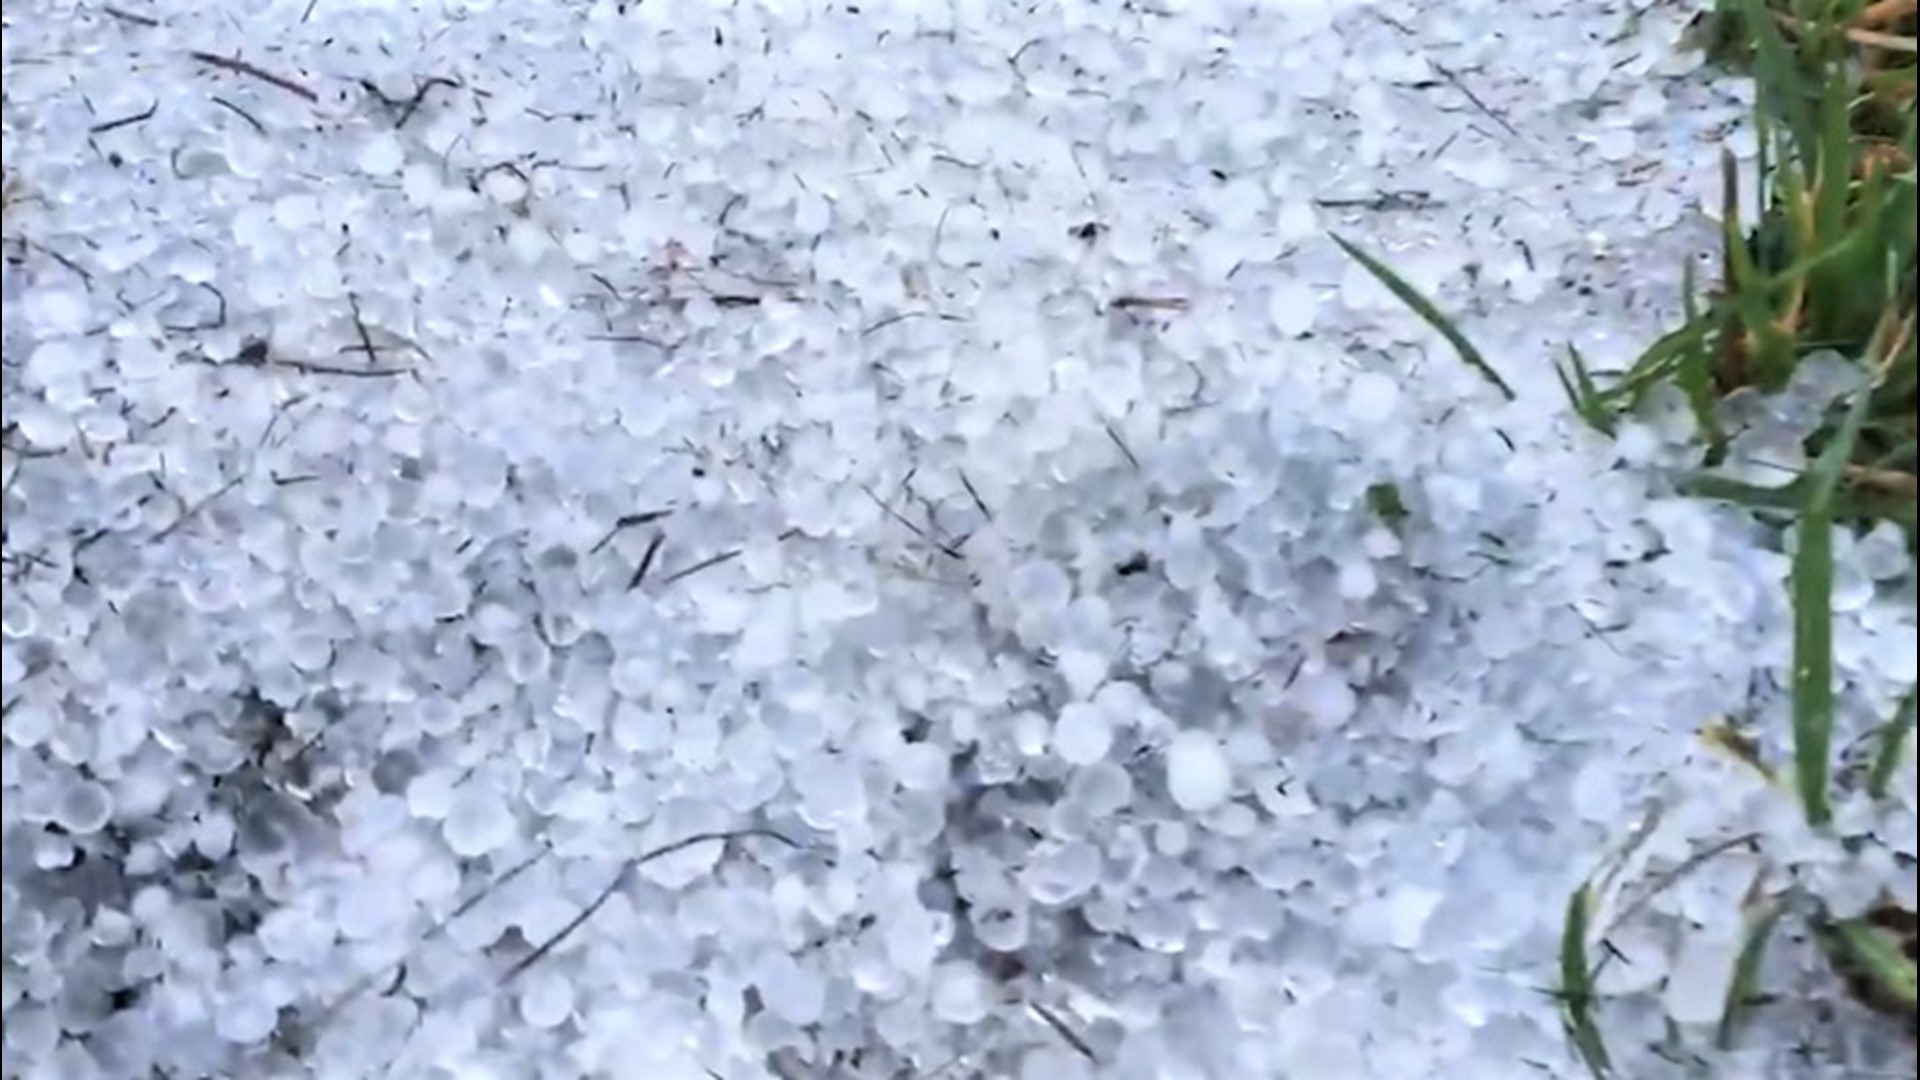 Severe weather left a trail of hail along the roads of Springfield, West Virginia, on April 8.